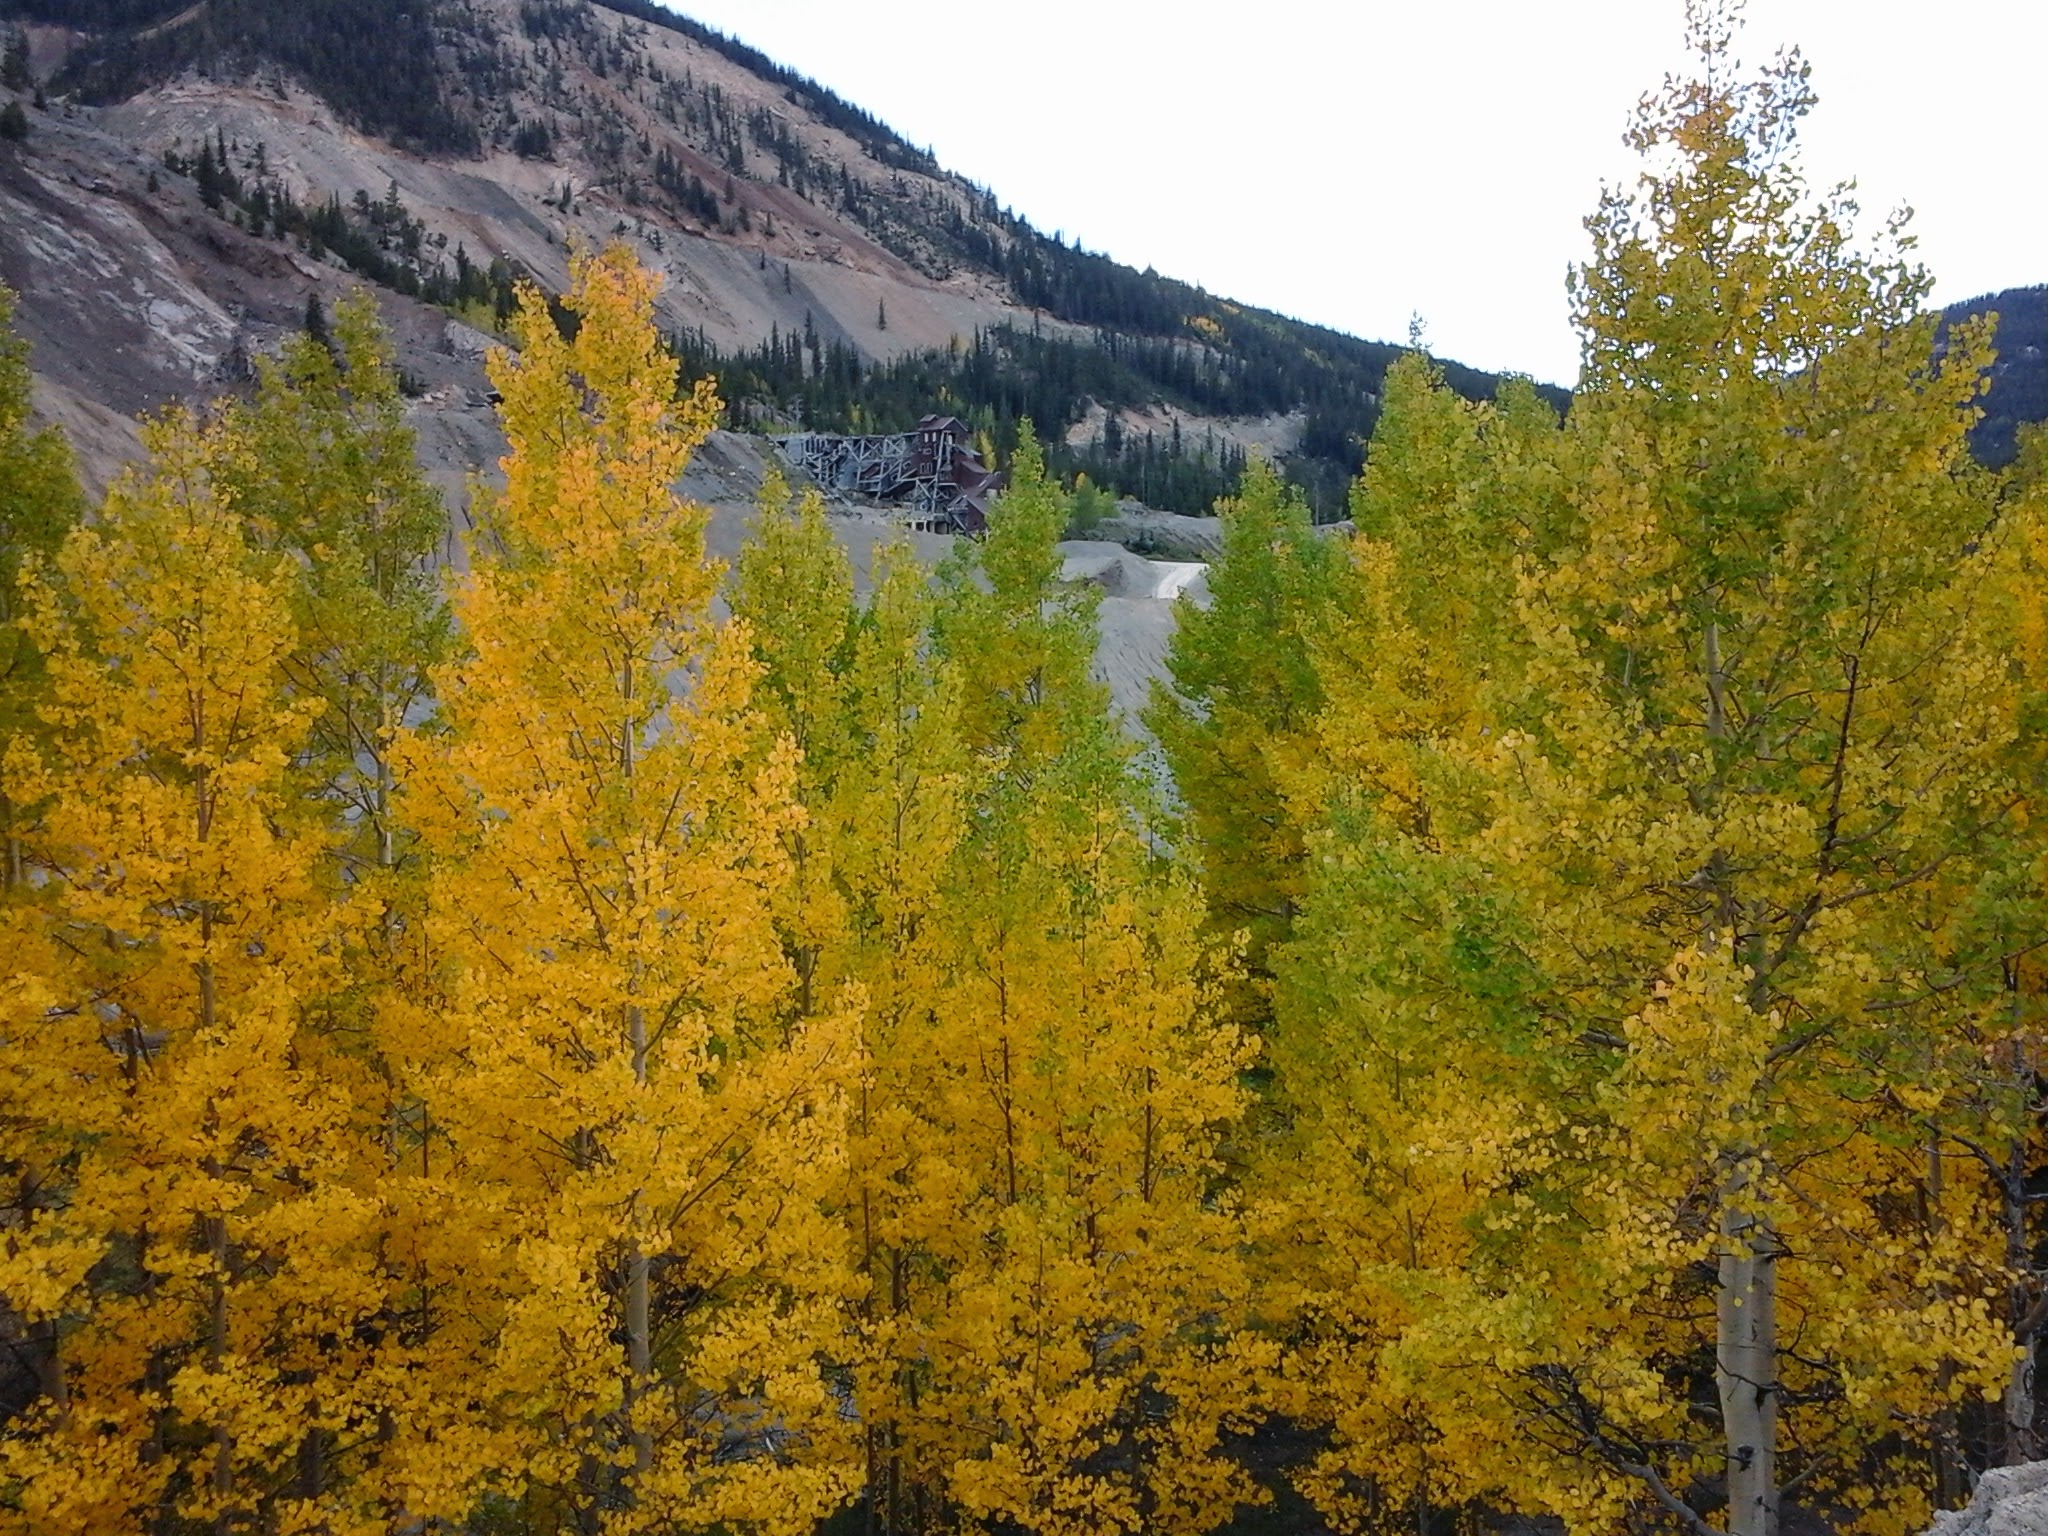 Fall colors on Aspen trees in the mountains.